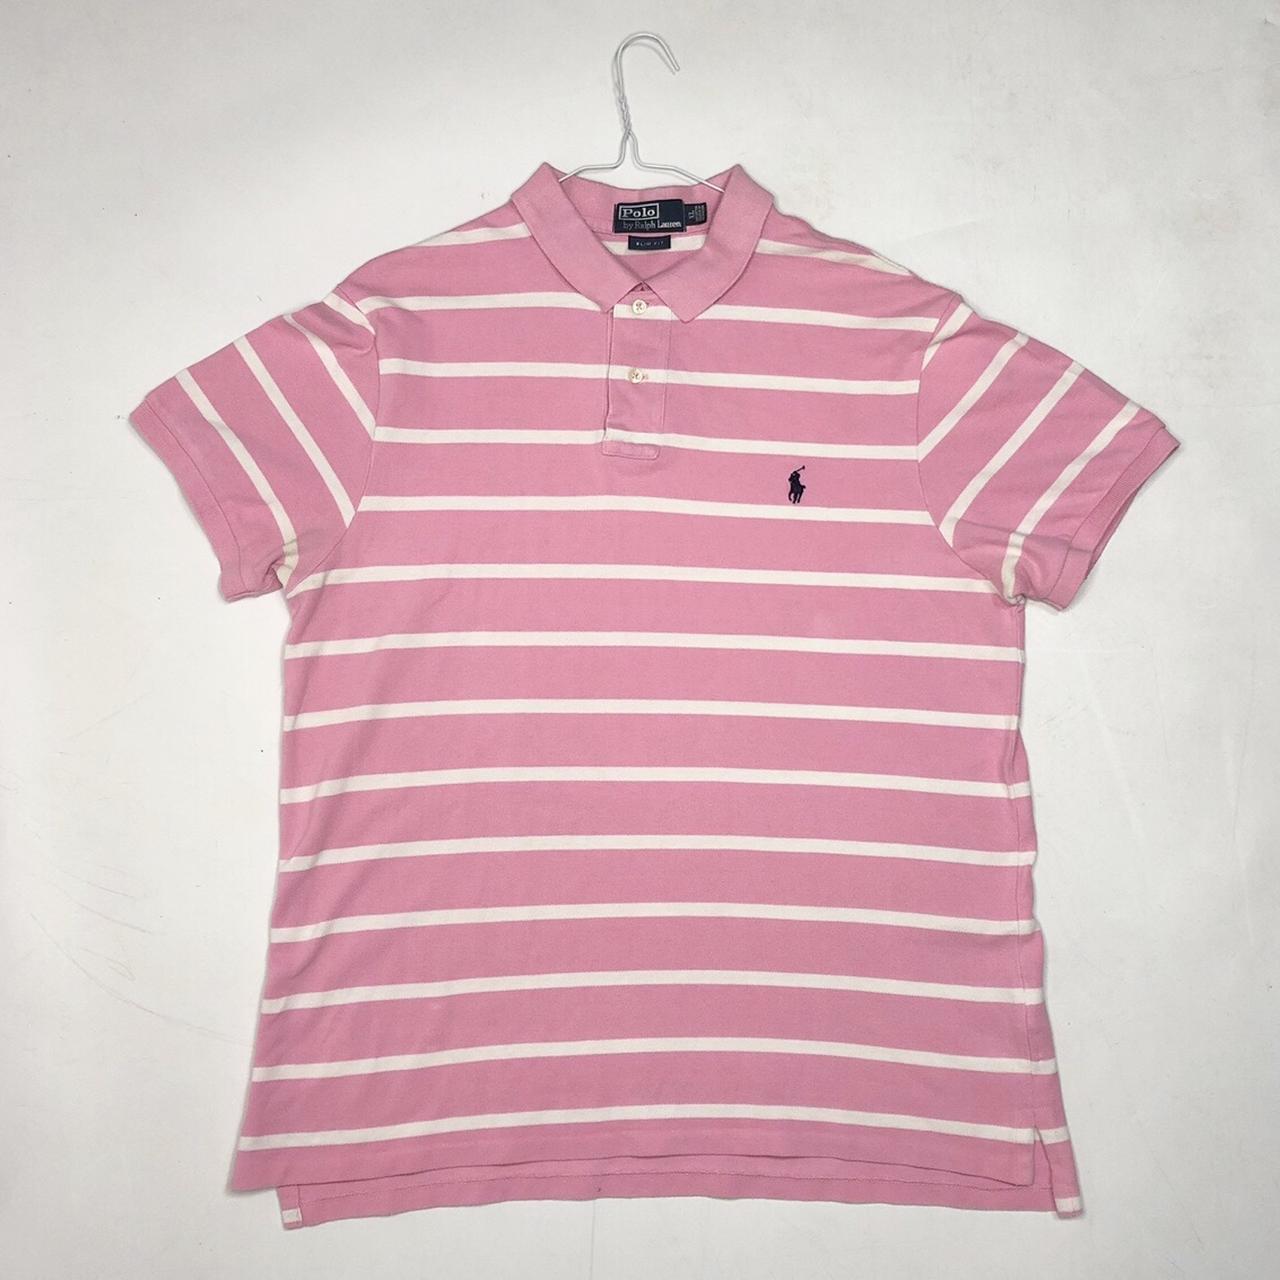 Vintage Polo Ralph Lauren embroidered small basic... - Depop